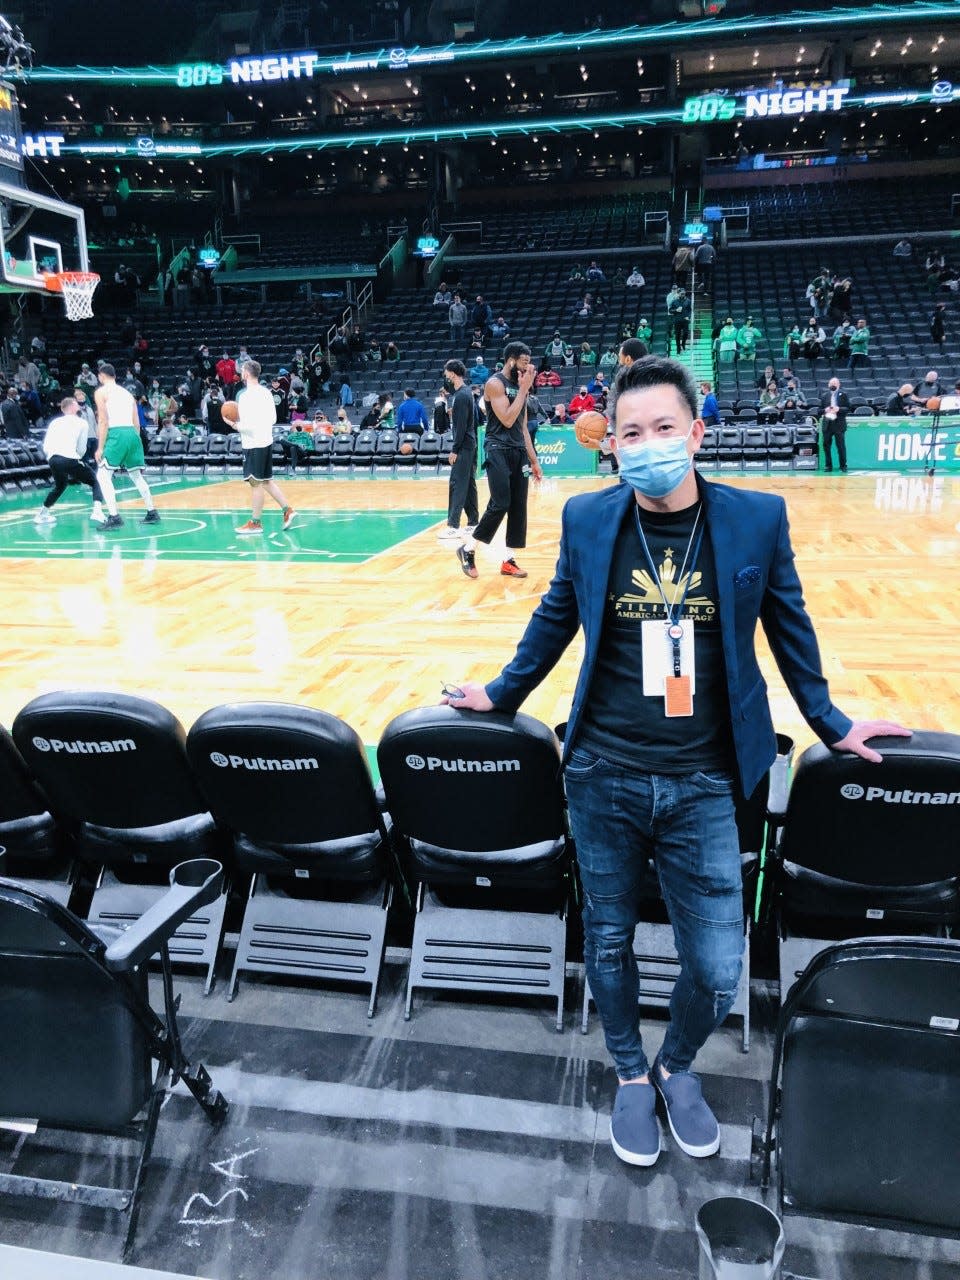 Harold Mortel, of Quincy, had courtside seats during the Boston Celtics game against the Houston Rockets last year.